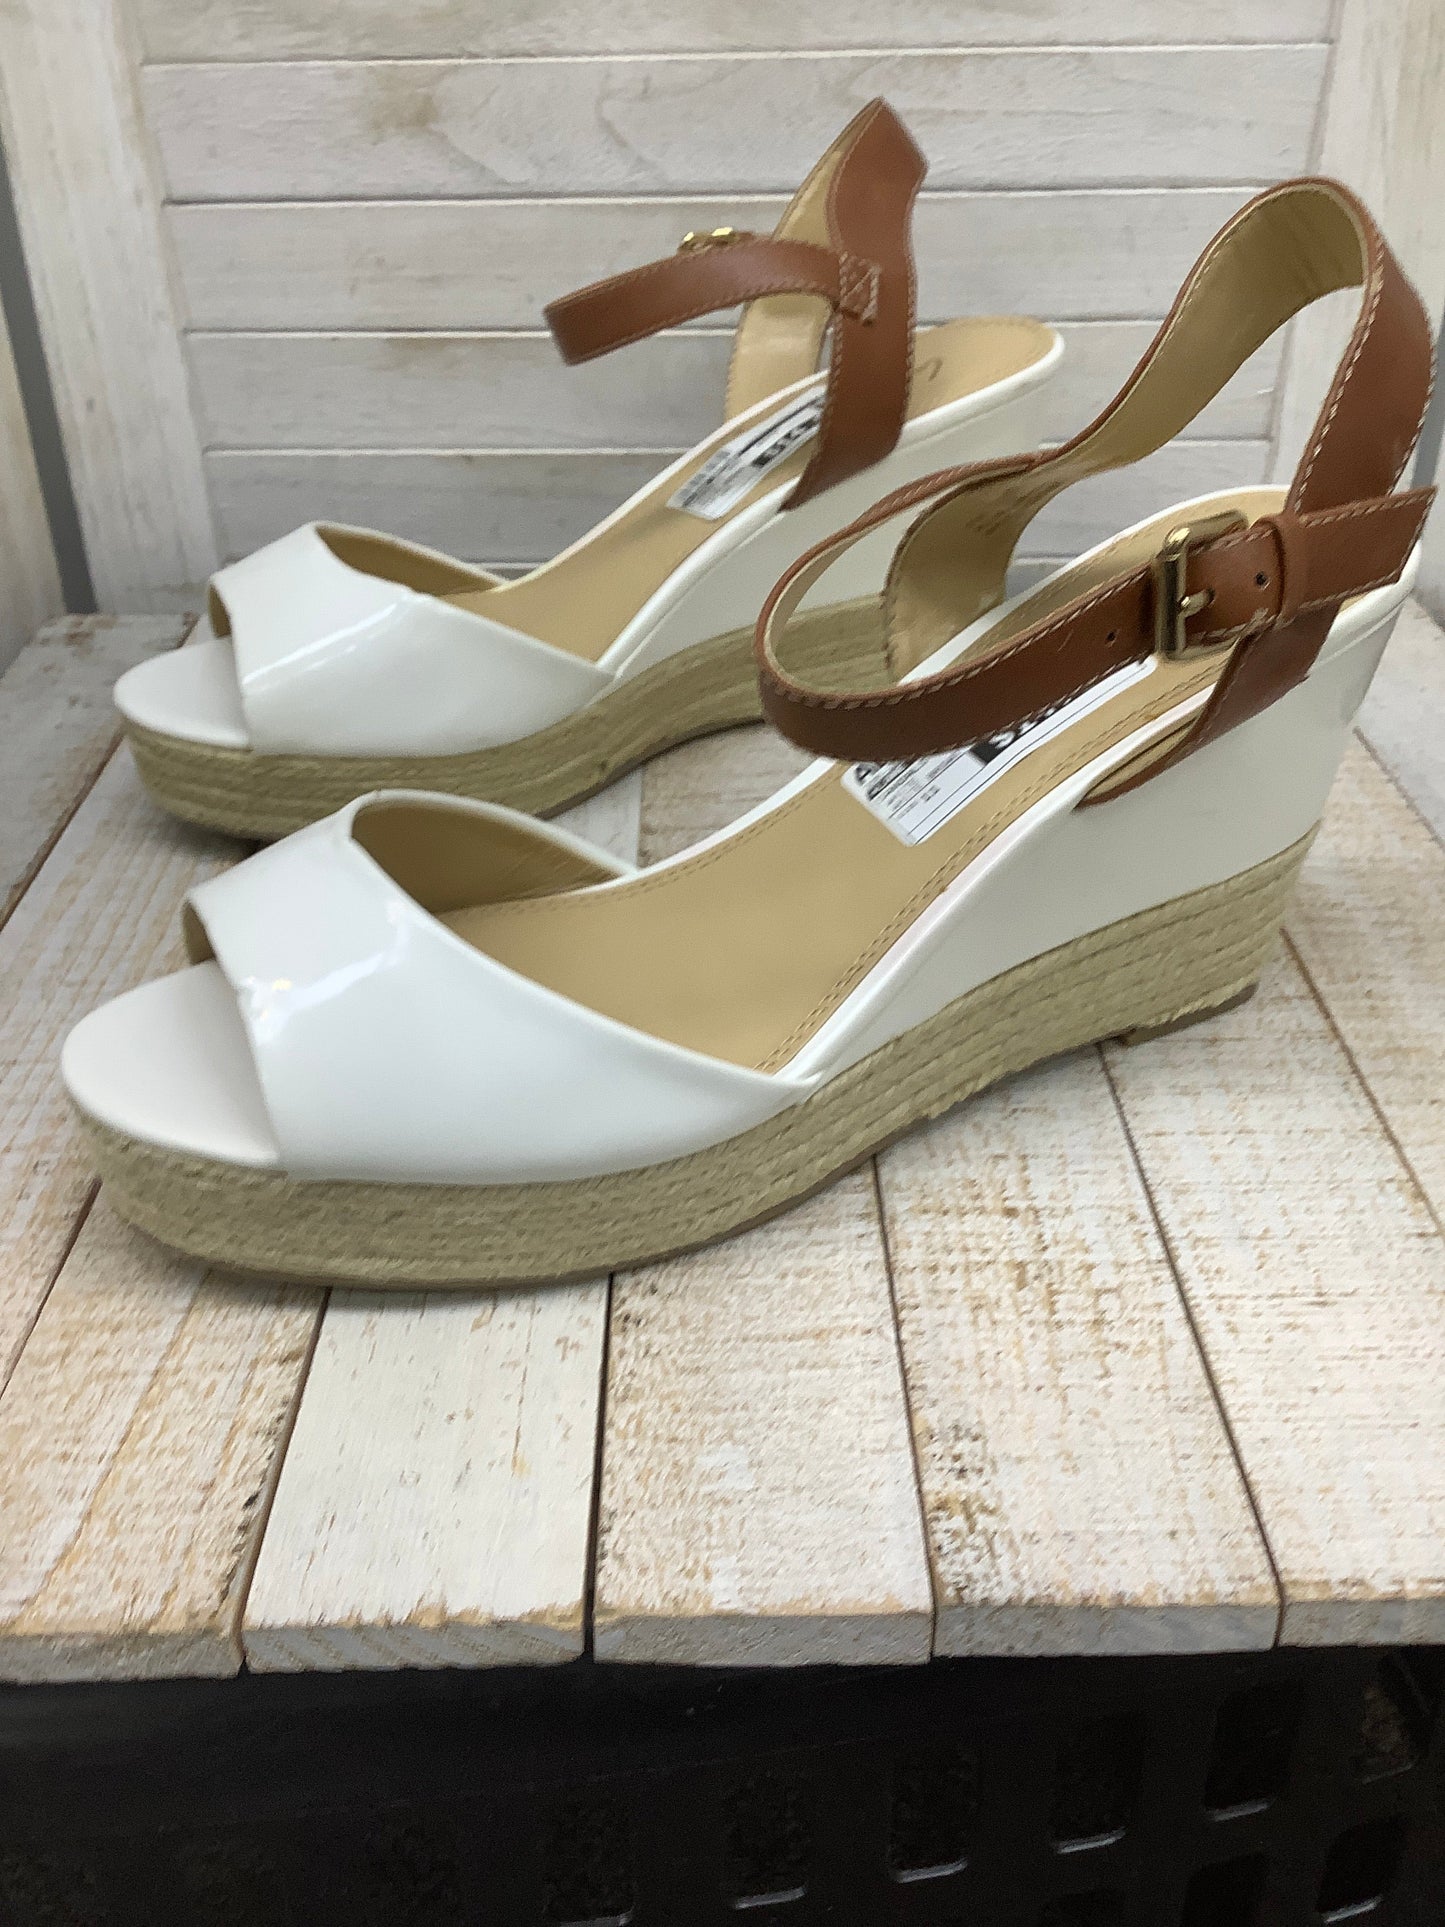 Sandals Heels Wedge By Lane Bryant  Size: 11